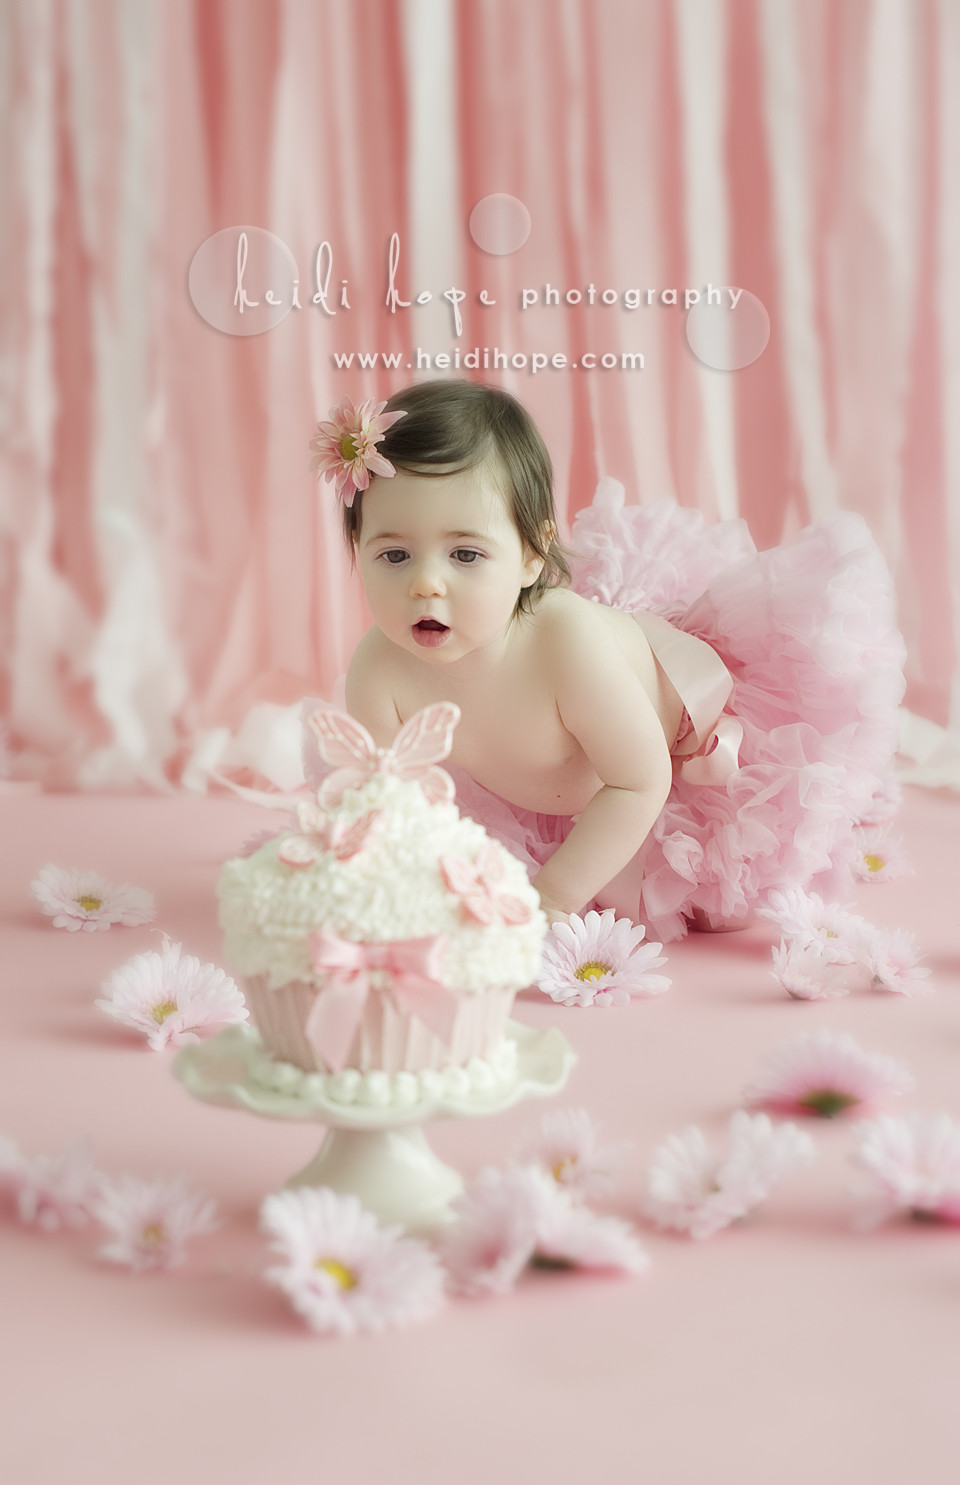 First Birthday Smash Cake
 Baby O turns 1 year old Rhode Island and Central